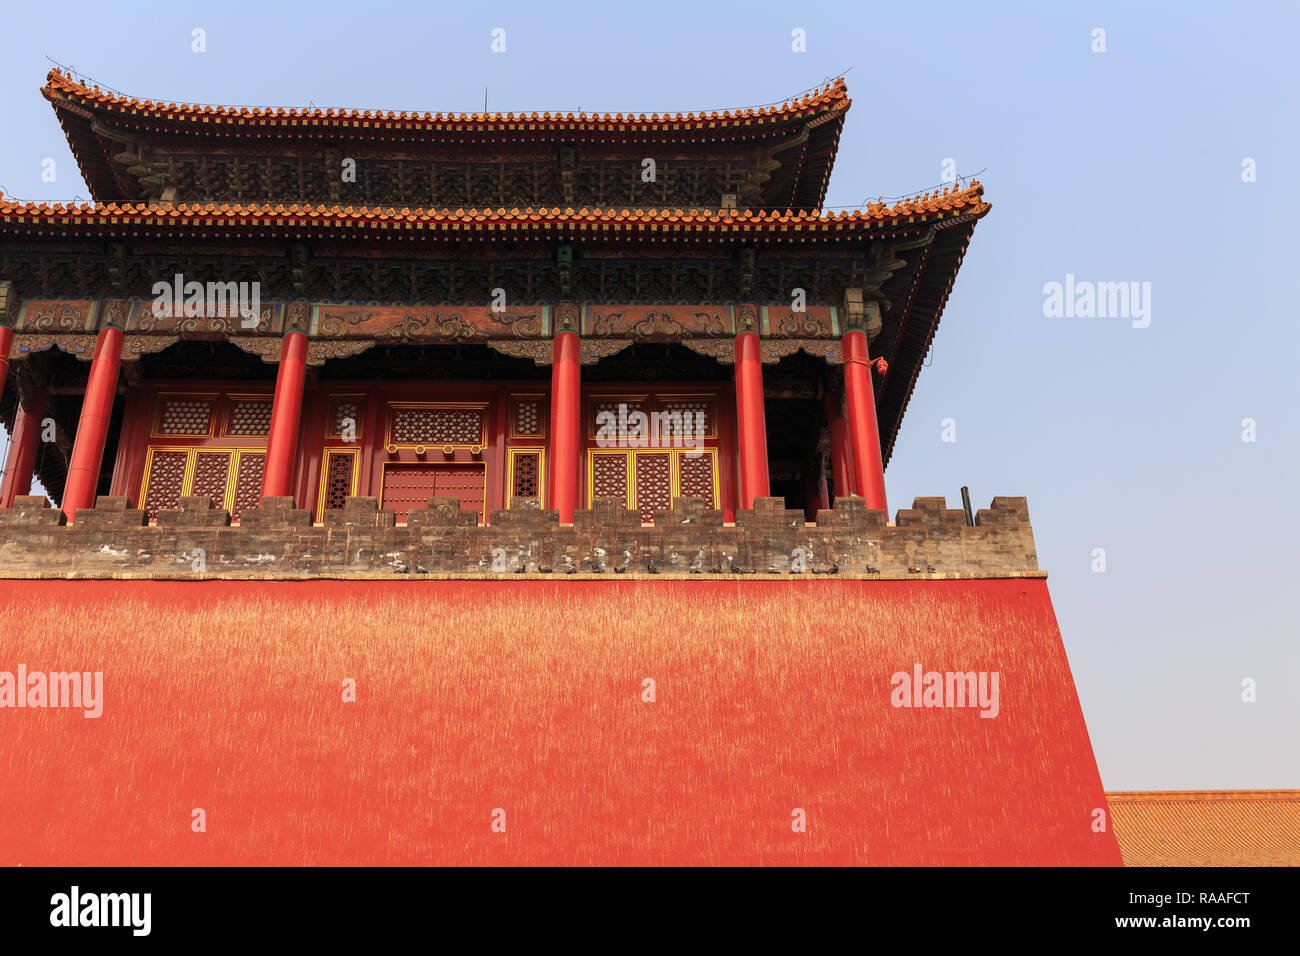 View up at Chinese guard tower at the Forbidden City in Beijing, China. Stock Photo